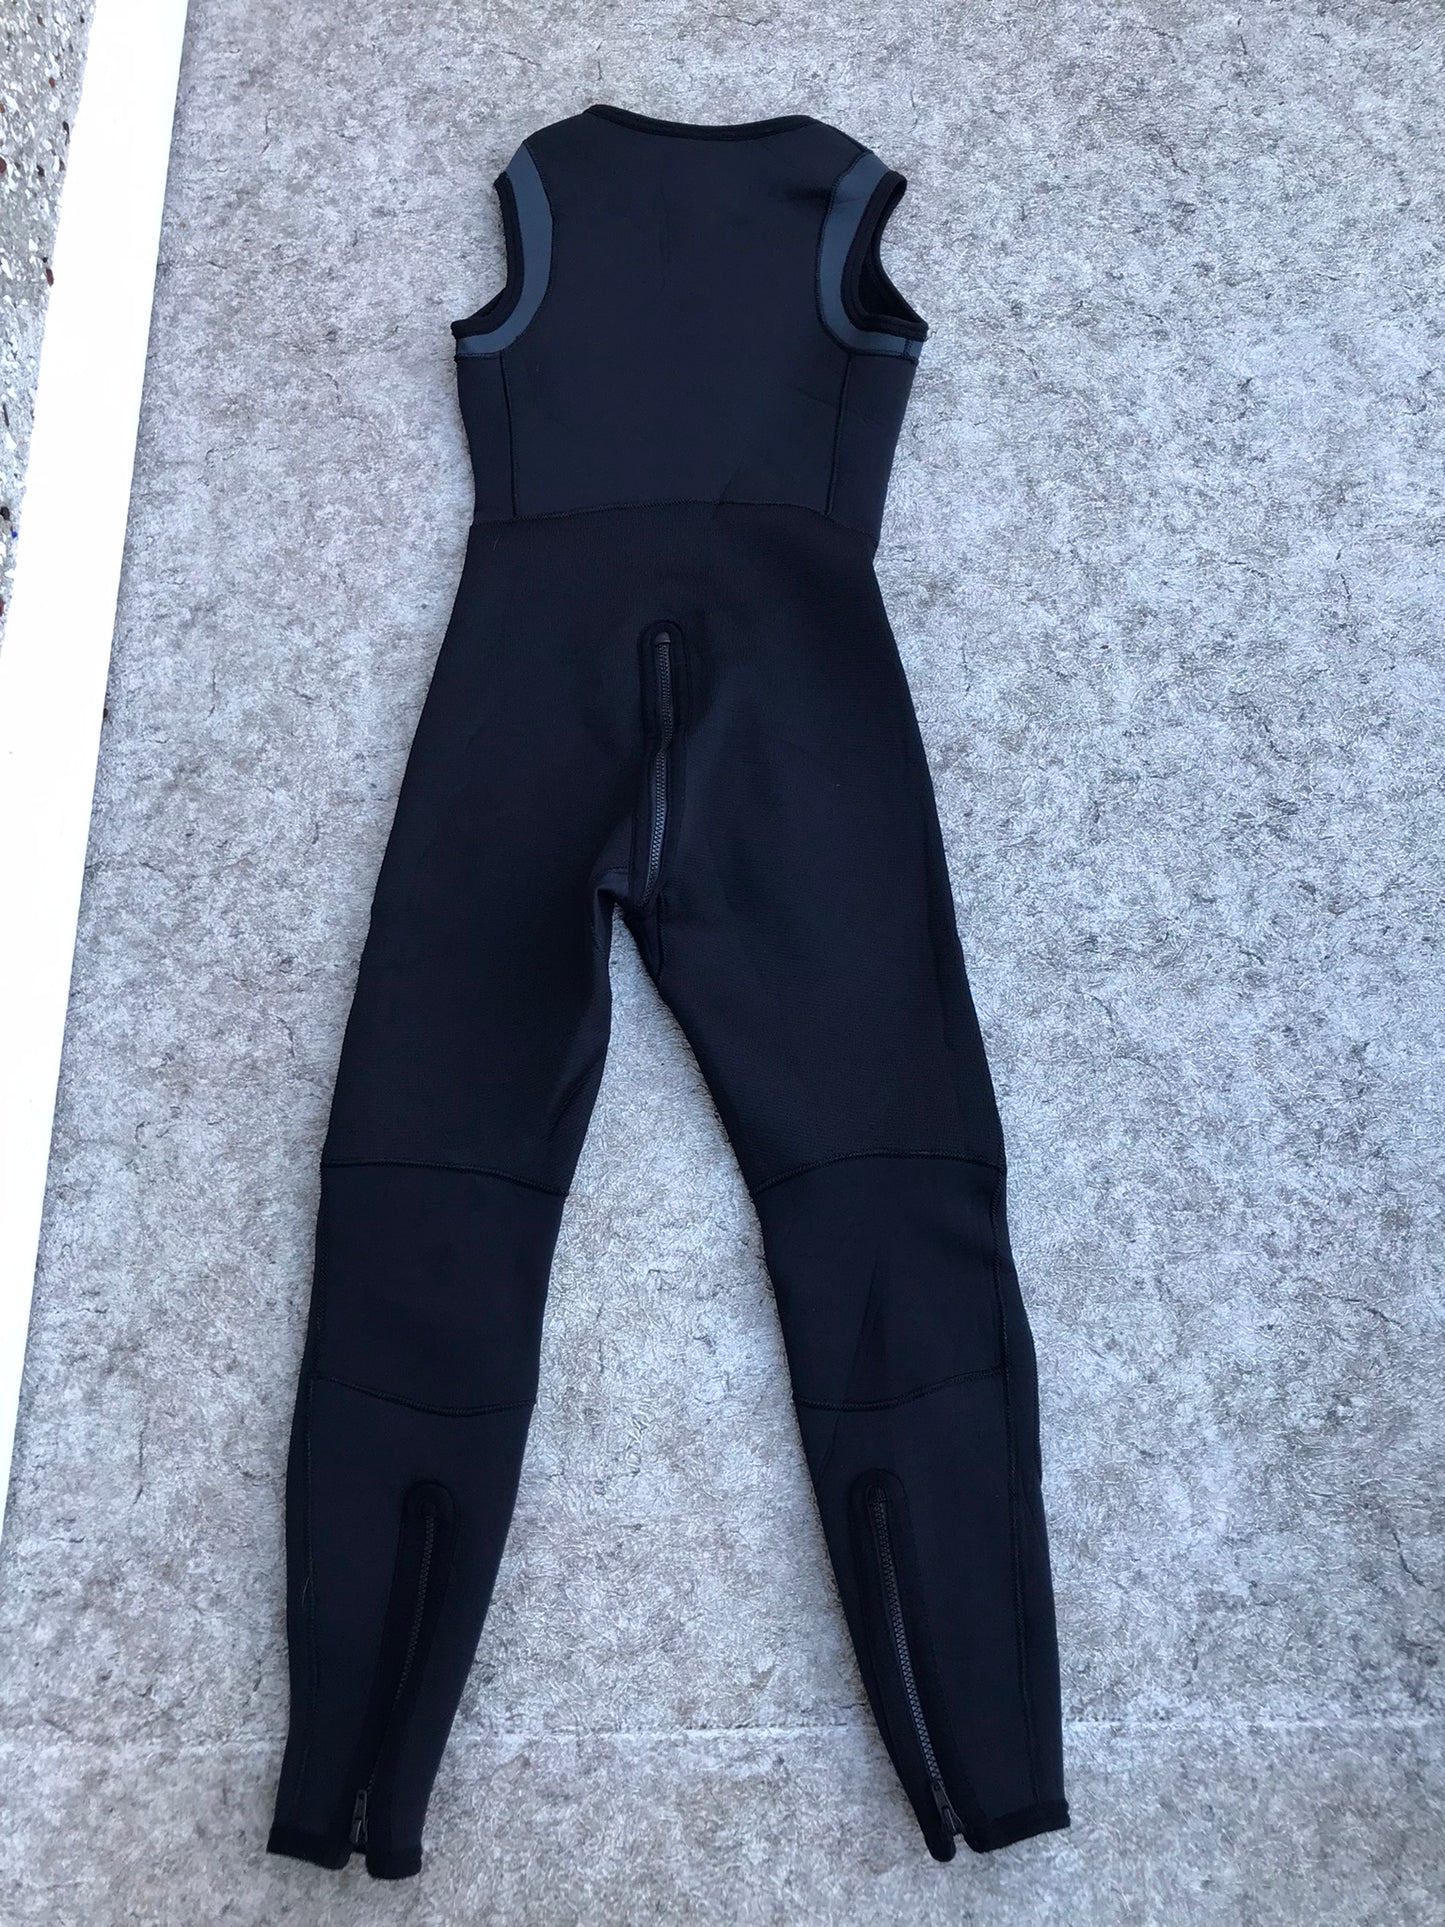 Wetsuit Men's Size Large Full John NRS Ultra 2-3 mm With Crotch Zipper Black Excellent As New